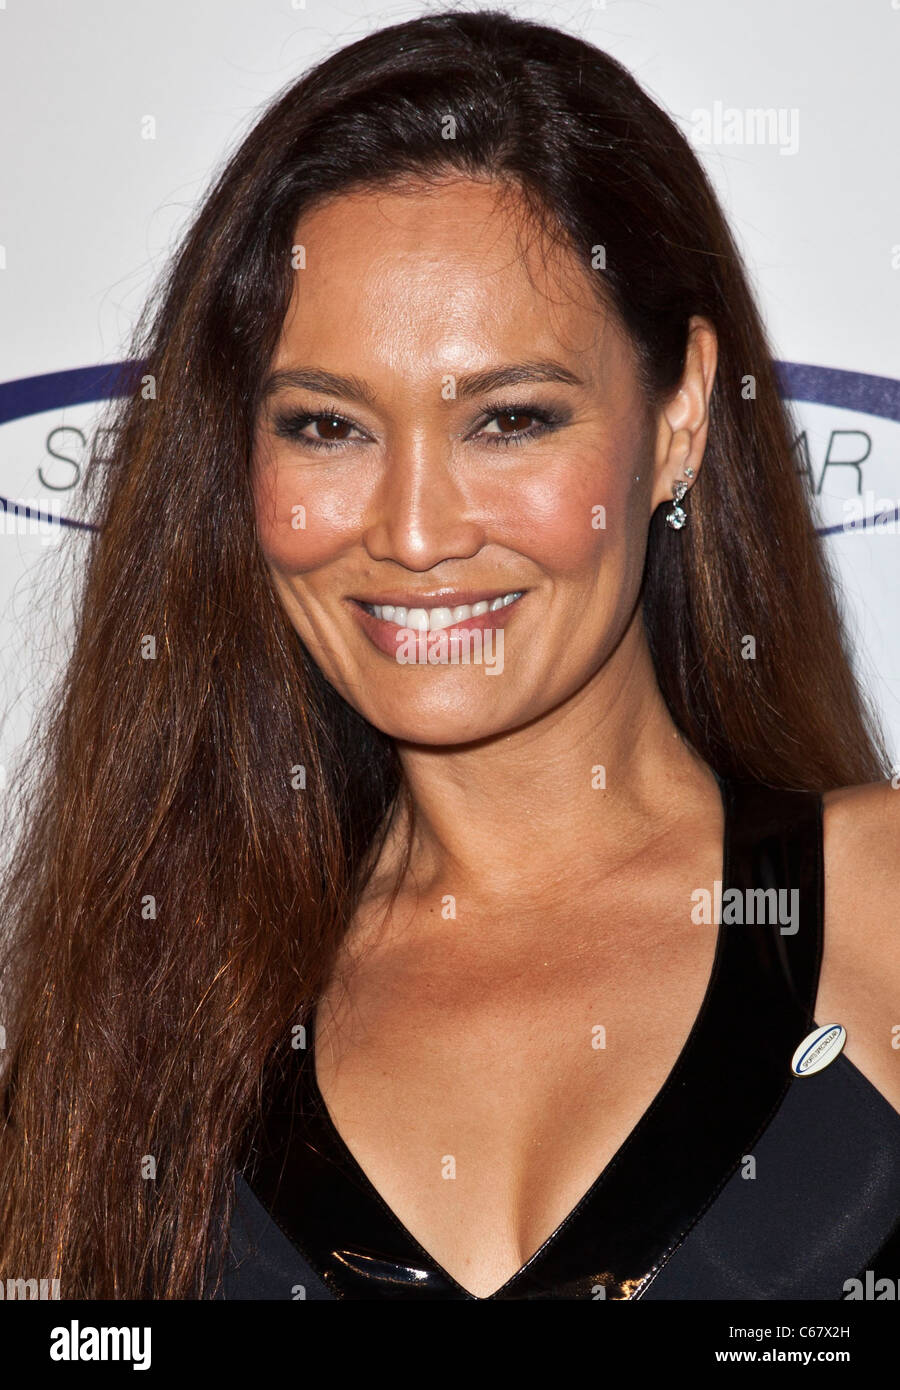 Tia Carrere at arrivals for 26th Anniversary Sports Spectacular, Hyatt Regency Century Plaza Hotel, Los Angeles, CA May 22, 2011. Photo By: Emiley Schweich/Everett Collection Stock Photo